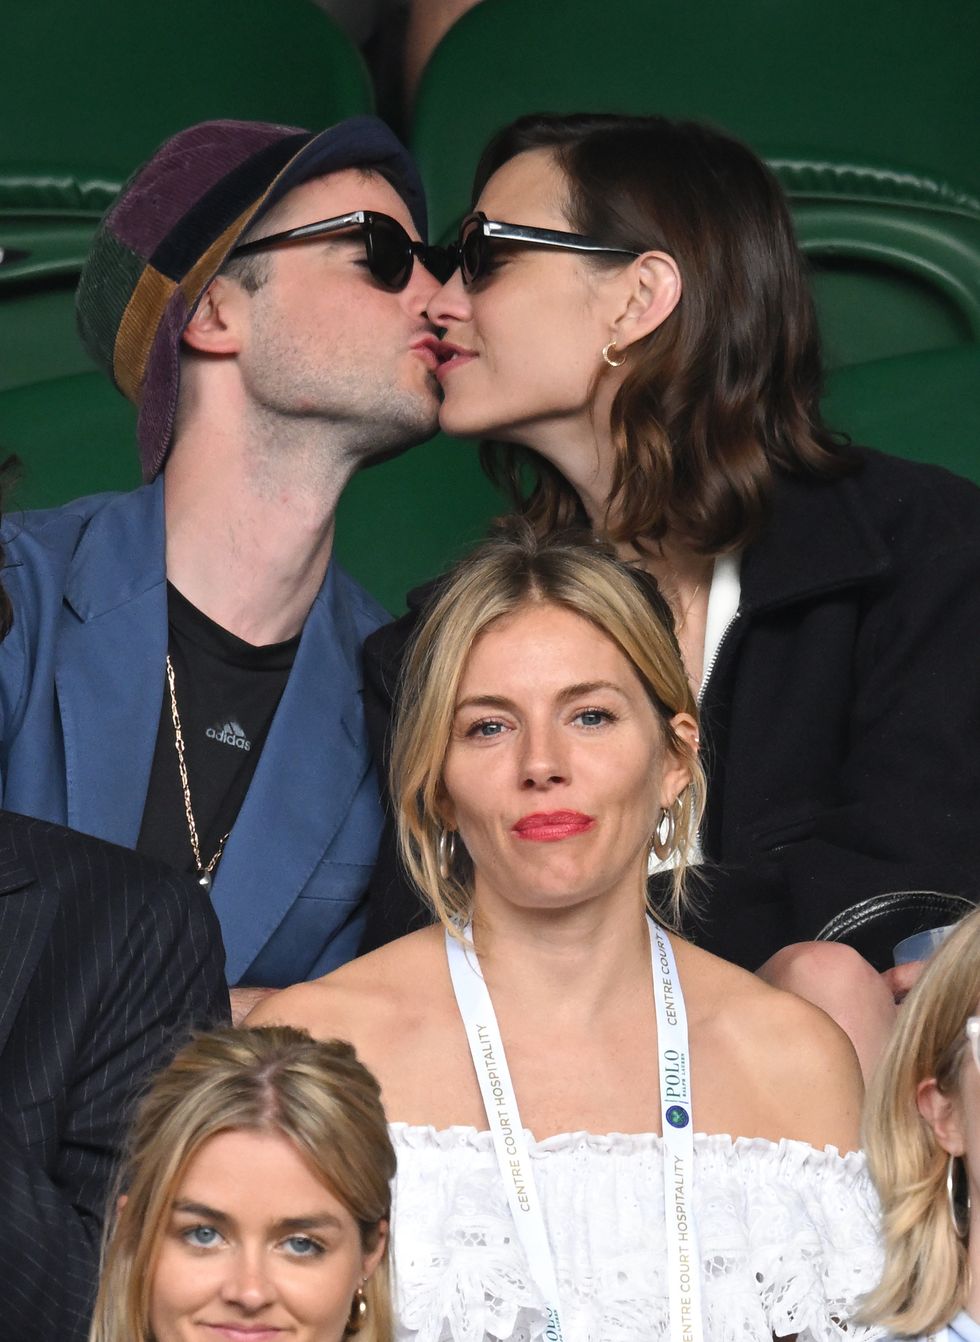 london, england july 03 tom sturridge, alexa chung and sienna miller attend day 7 of the wimbledon tennis championships at the all england lawn tennis and croquet club on july 03, 2022 in london, england photo by karwai tangwireimage